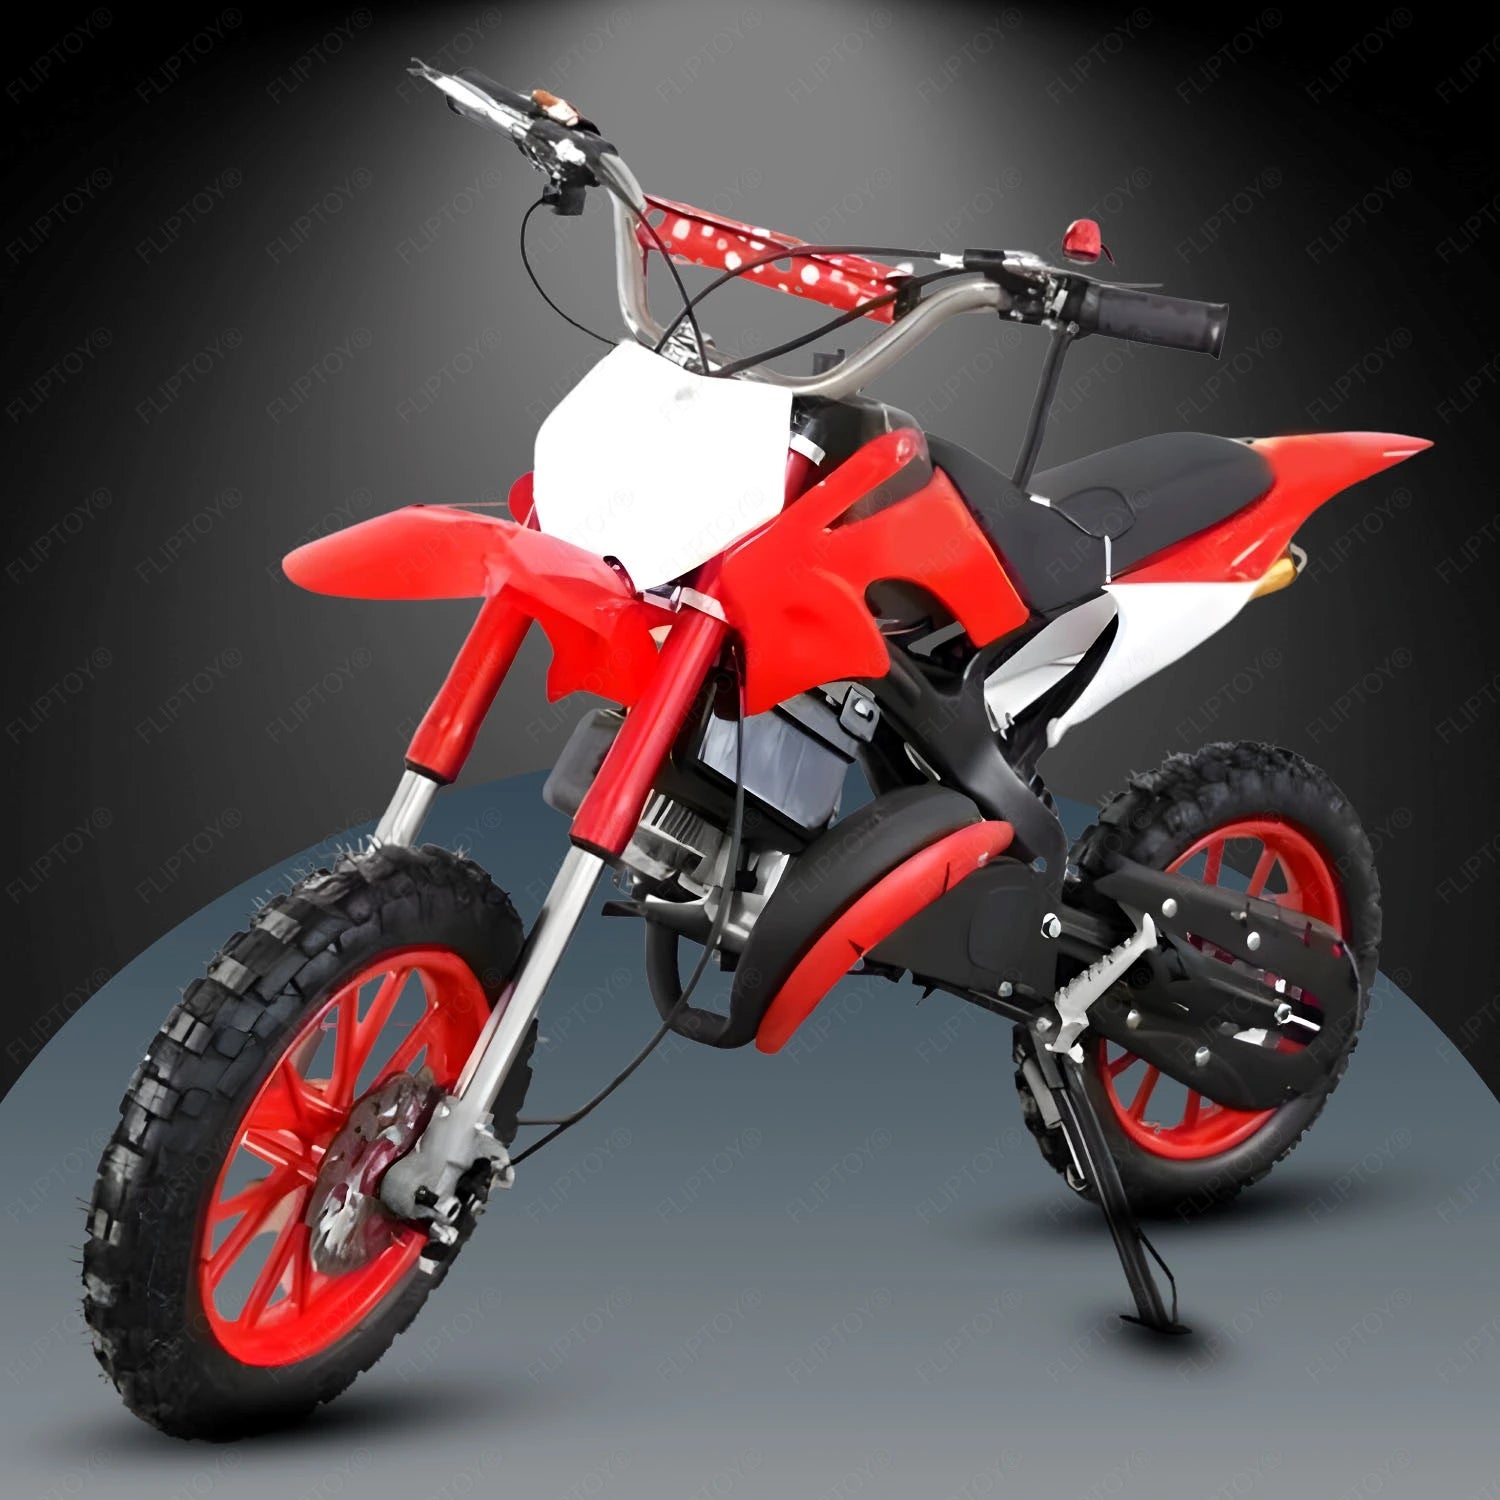 Gigaglitz Petrol Multicolor 50Cc Kids Dirt Bike 86Cm Wheelbase- Only  Prepaid Orders Allowed - For Offroad Category & Purpose Only, Rear :  : Car & Motorbike